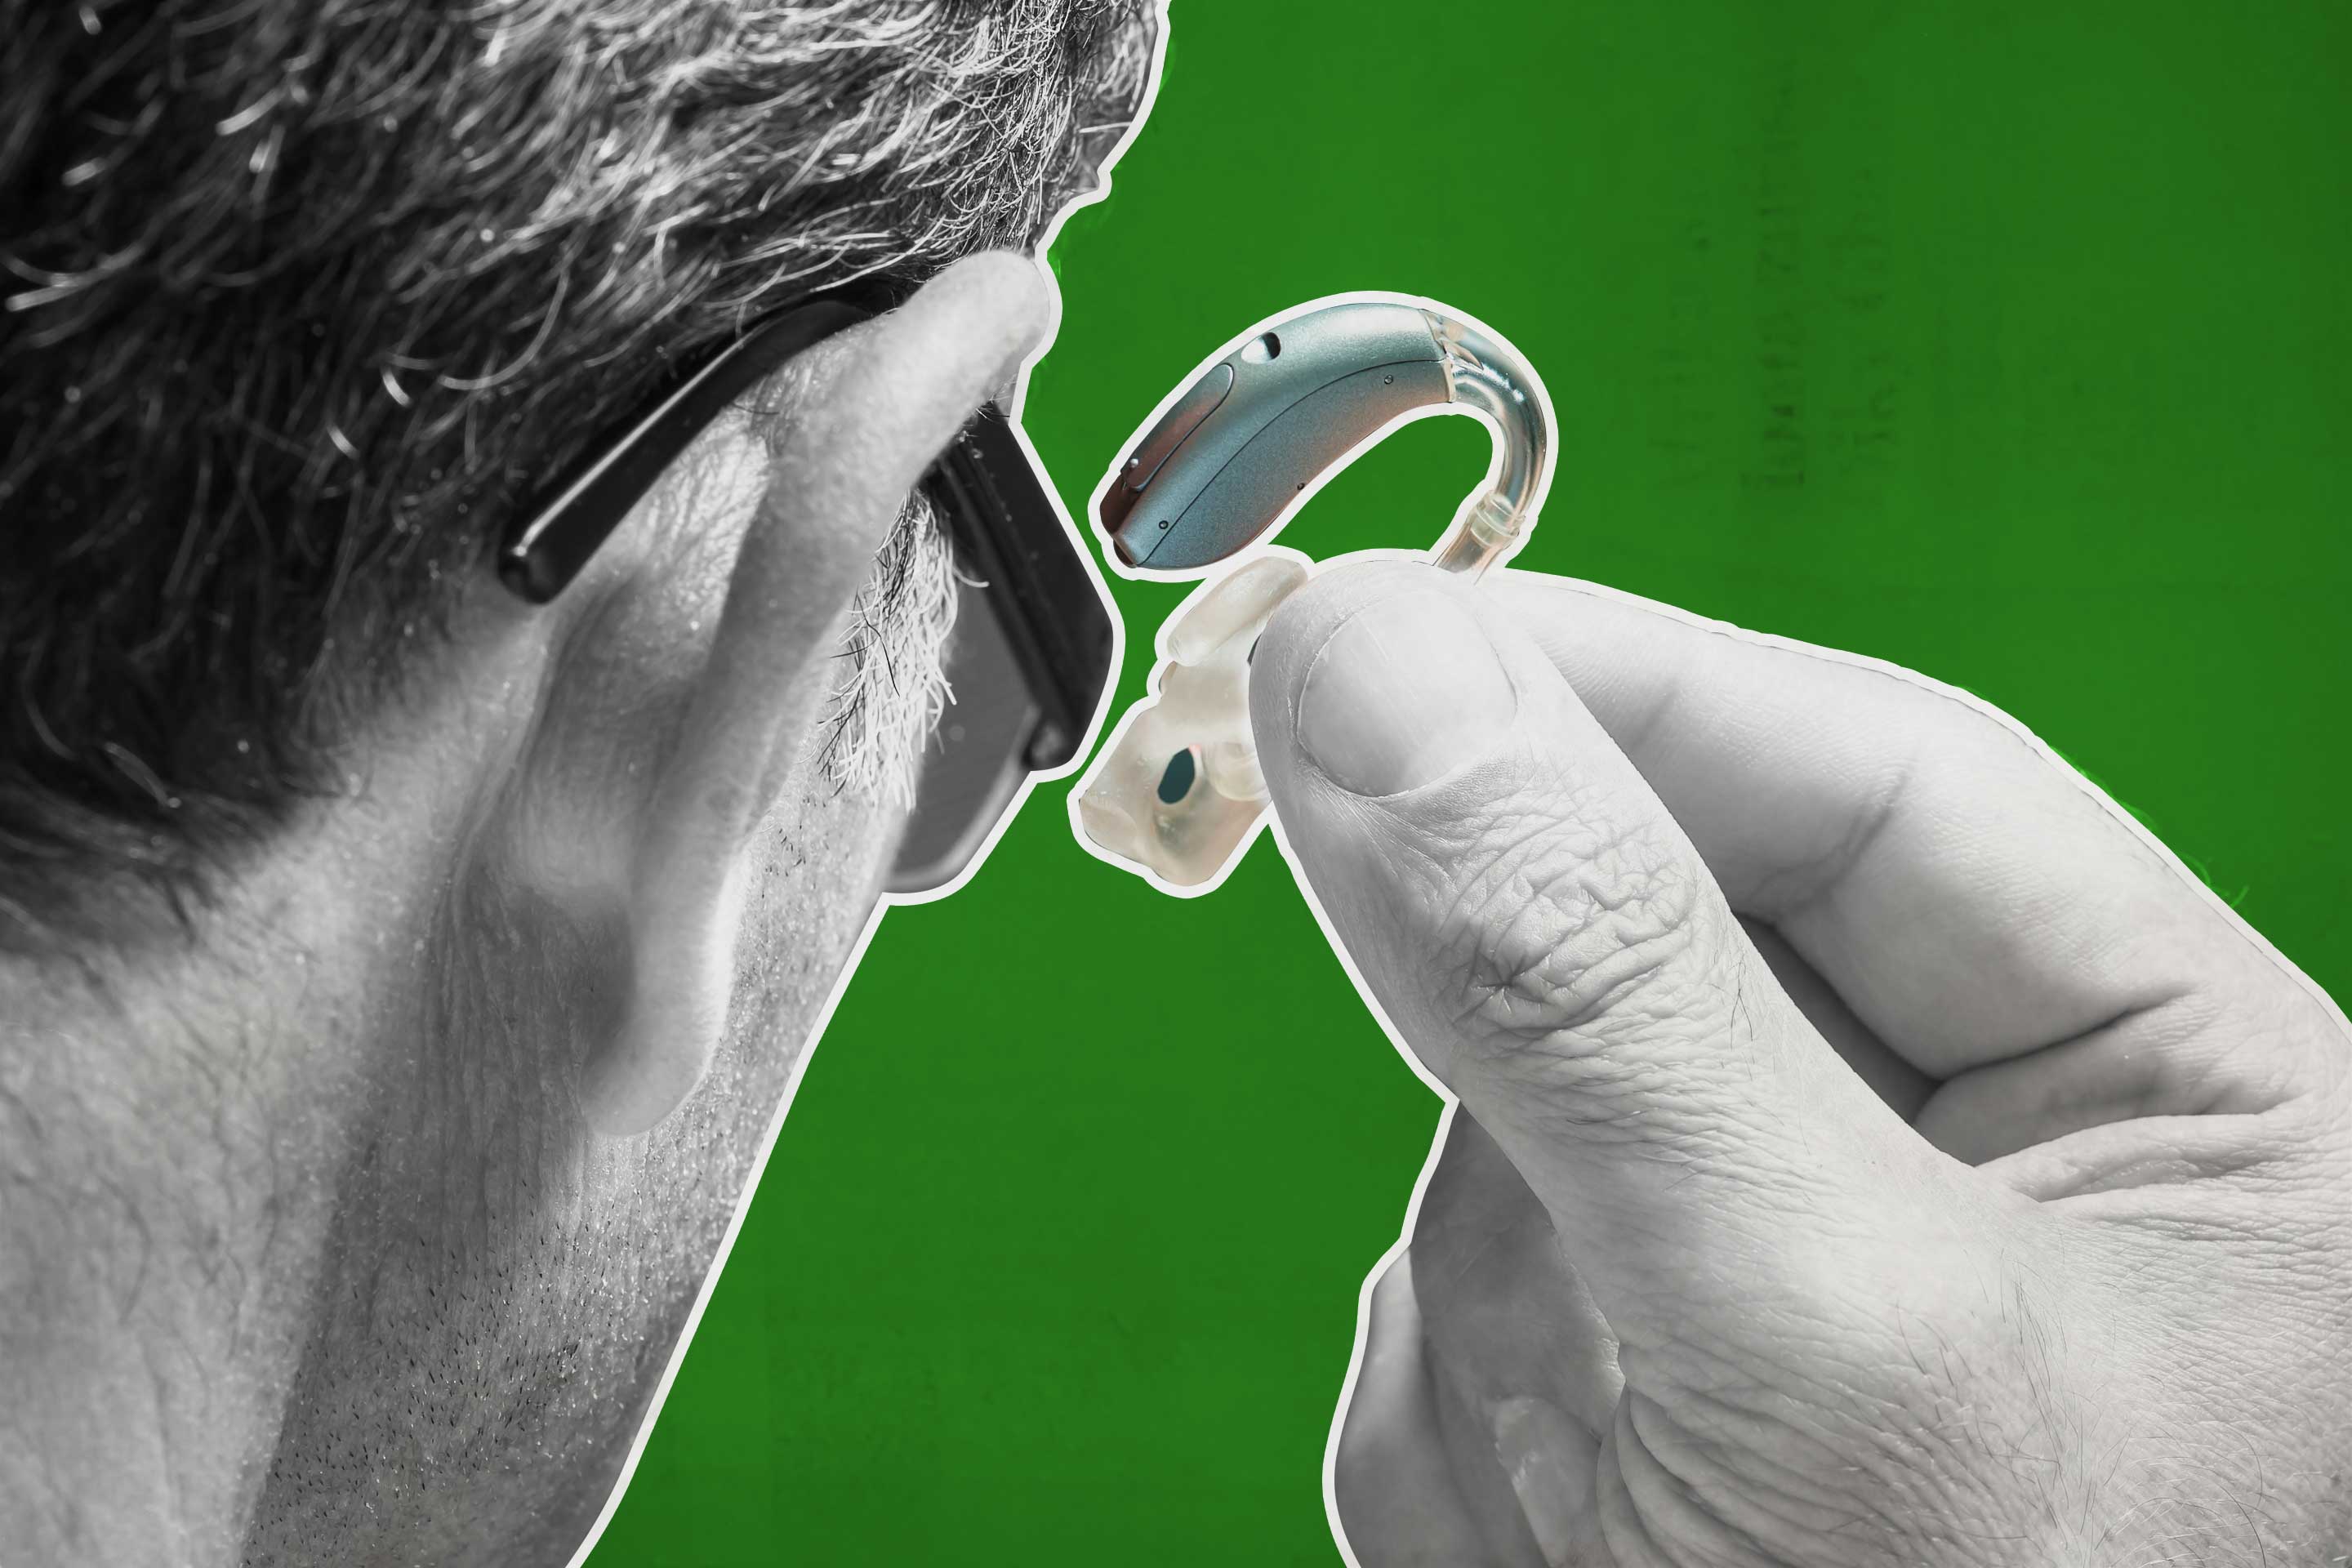 Hearing Aids Will Soon Be Much Cheaper and Easier to Get